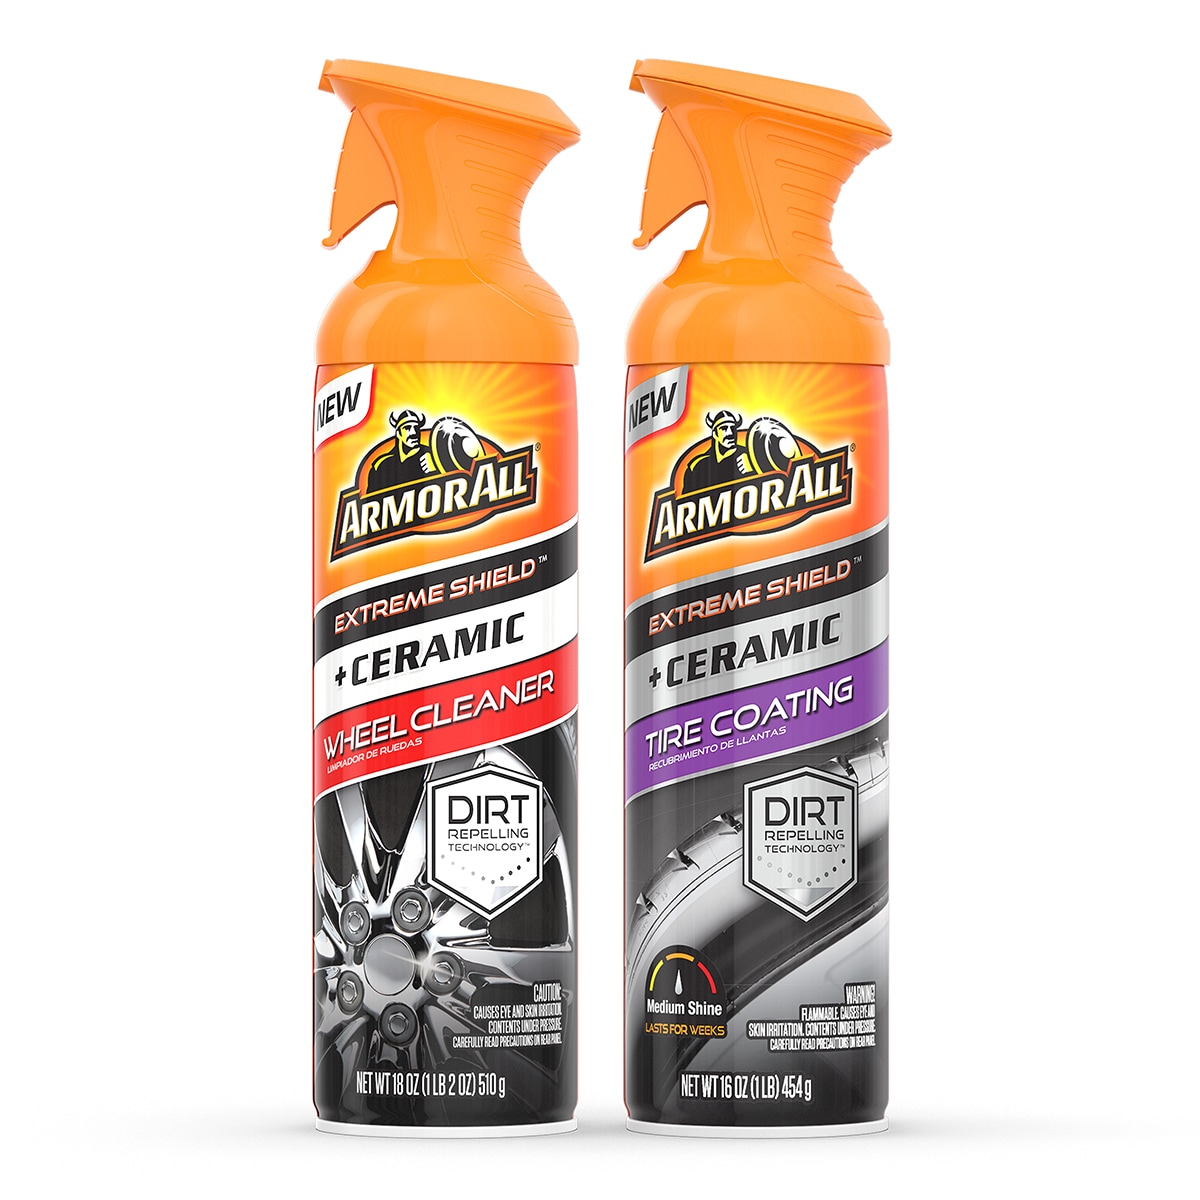 Armorall Tire Foam 4 Oz - 1 count only